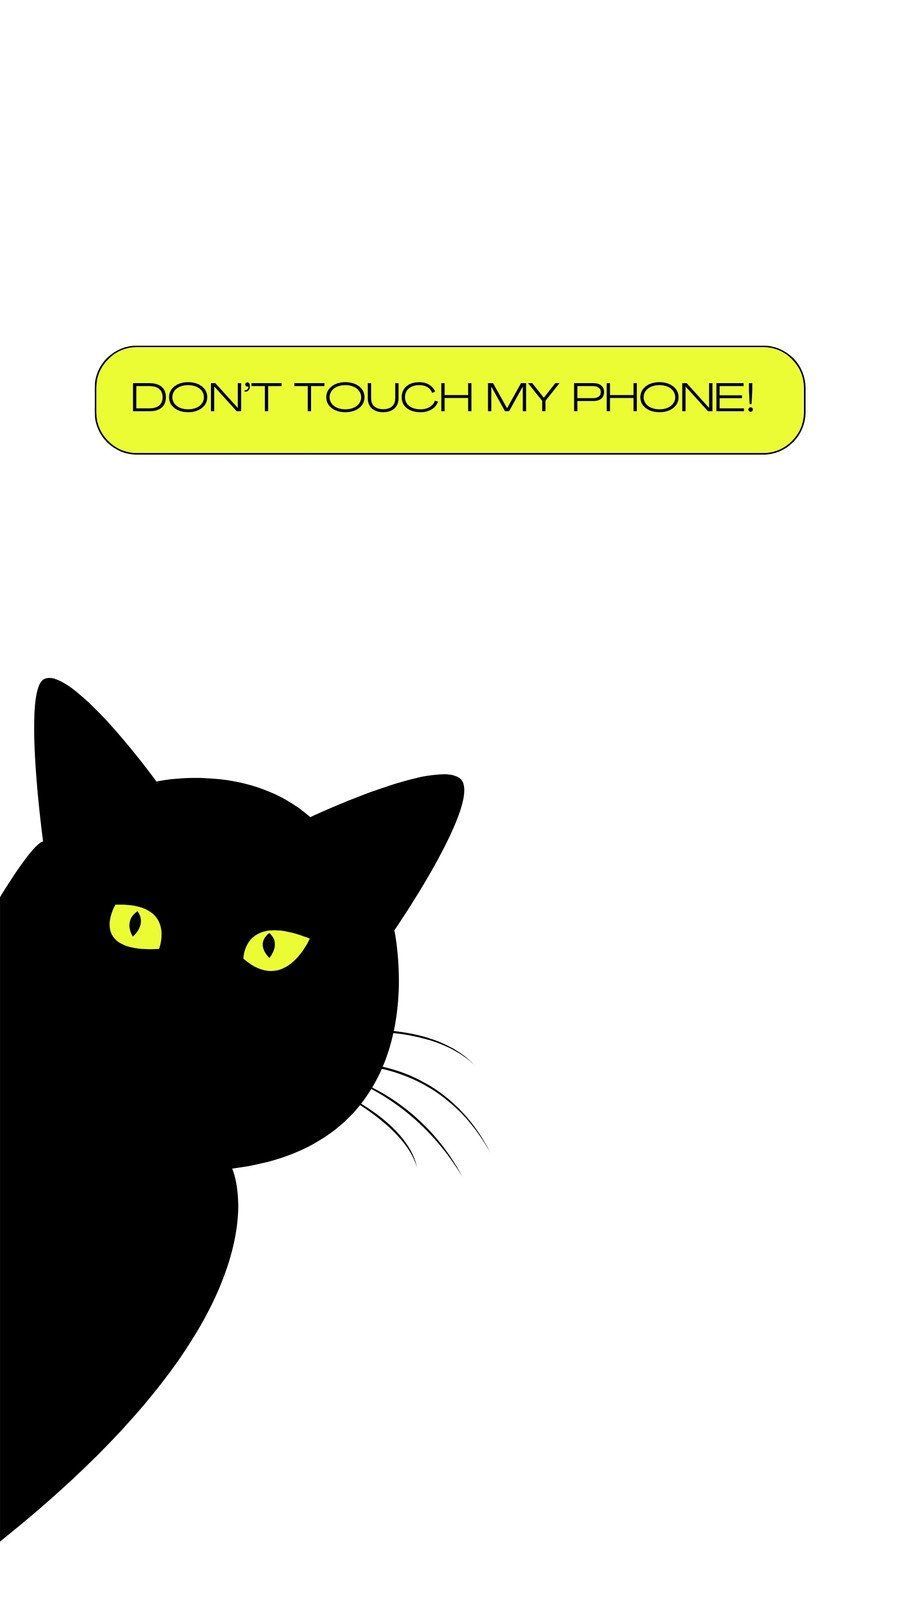 Black cat wallpaper for phone with a warning not to touch the phone. - Don't touch my phone